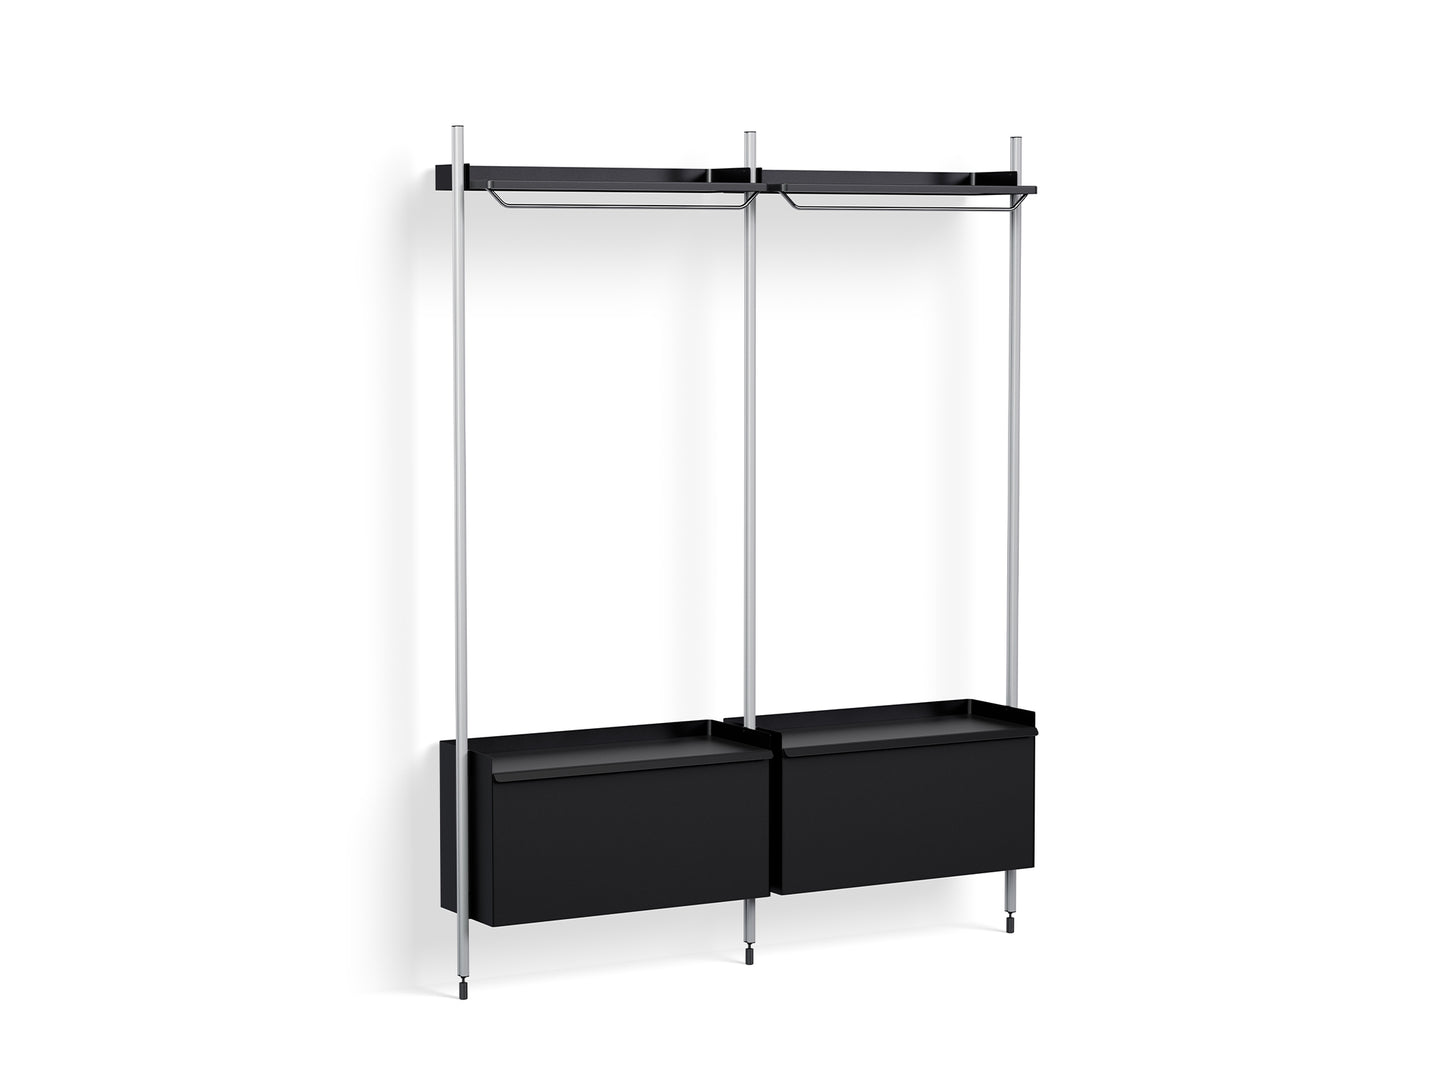 Pier System 1002 by HAY - Clear Anodised Aluminium Uprights / PS black 